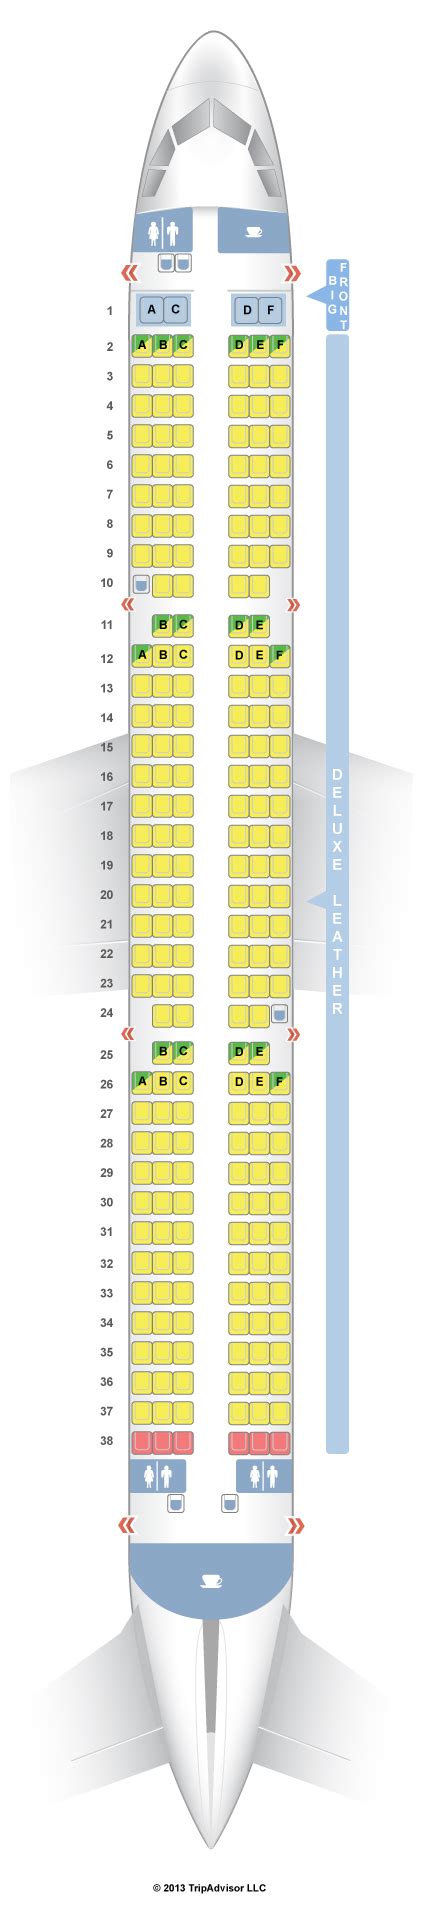 Spirit a321 airbus airlines seat map seating ai